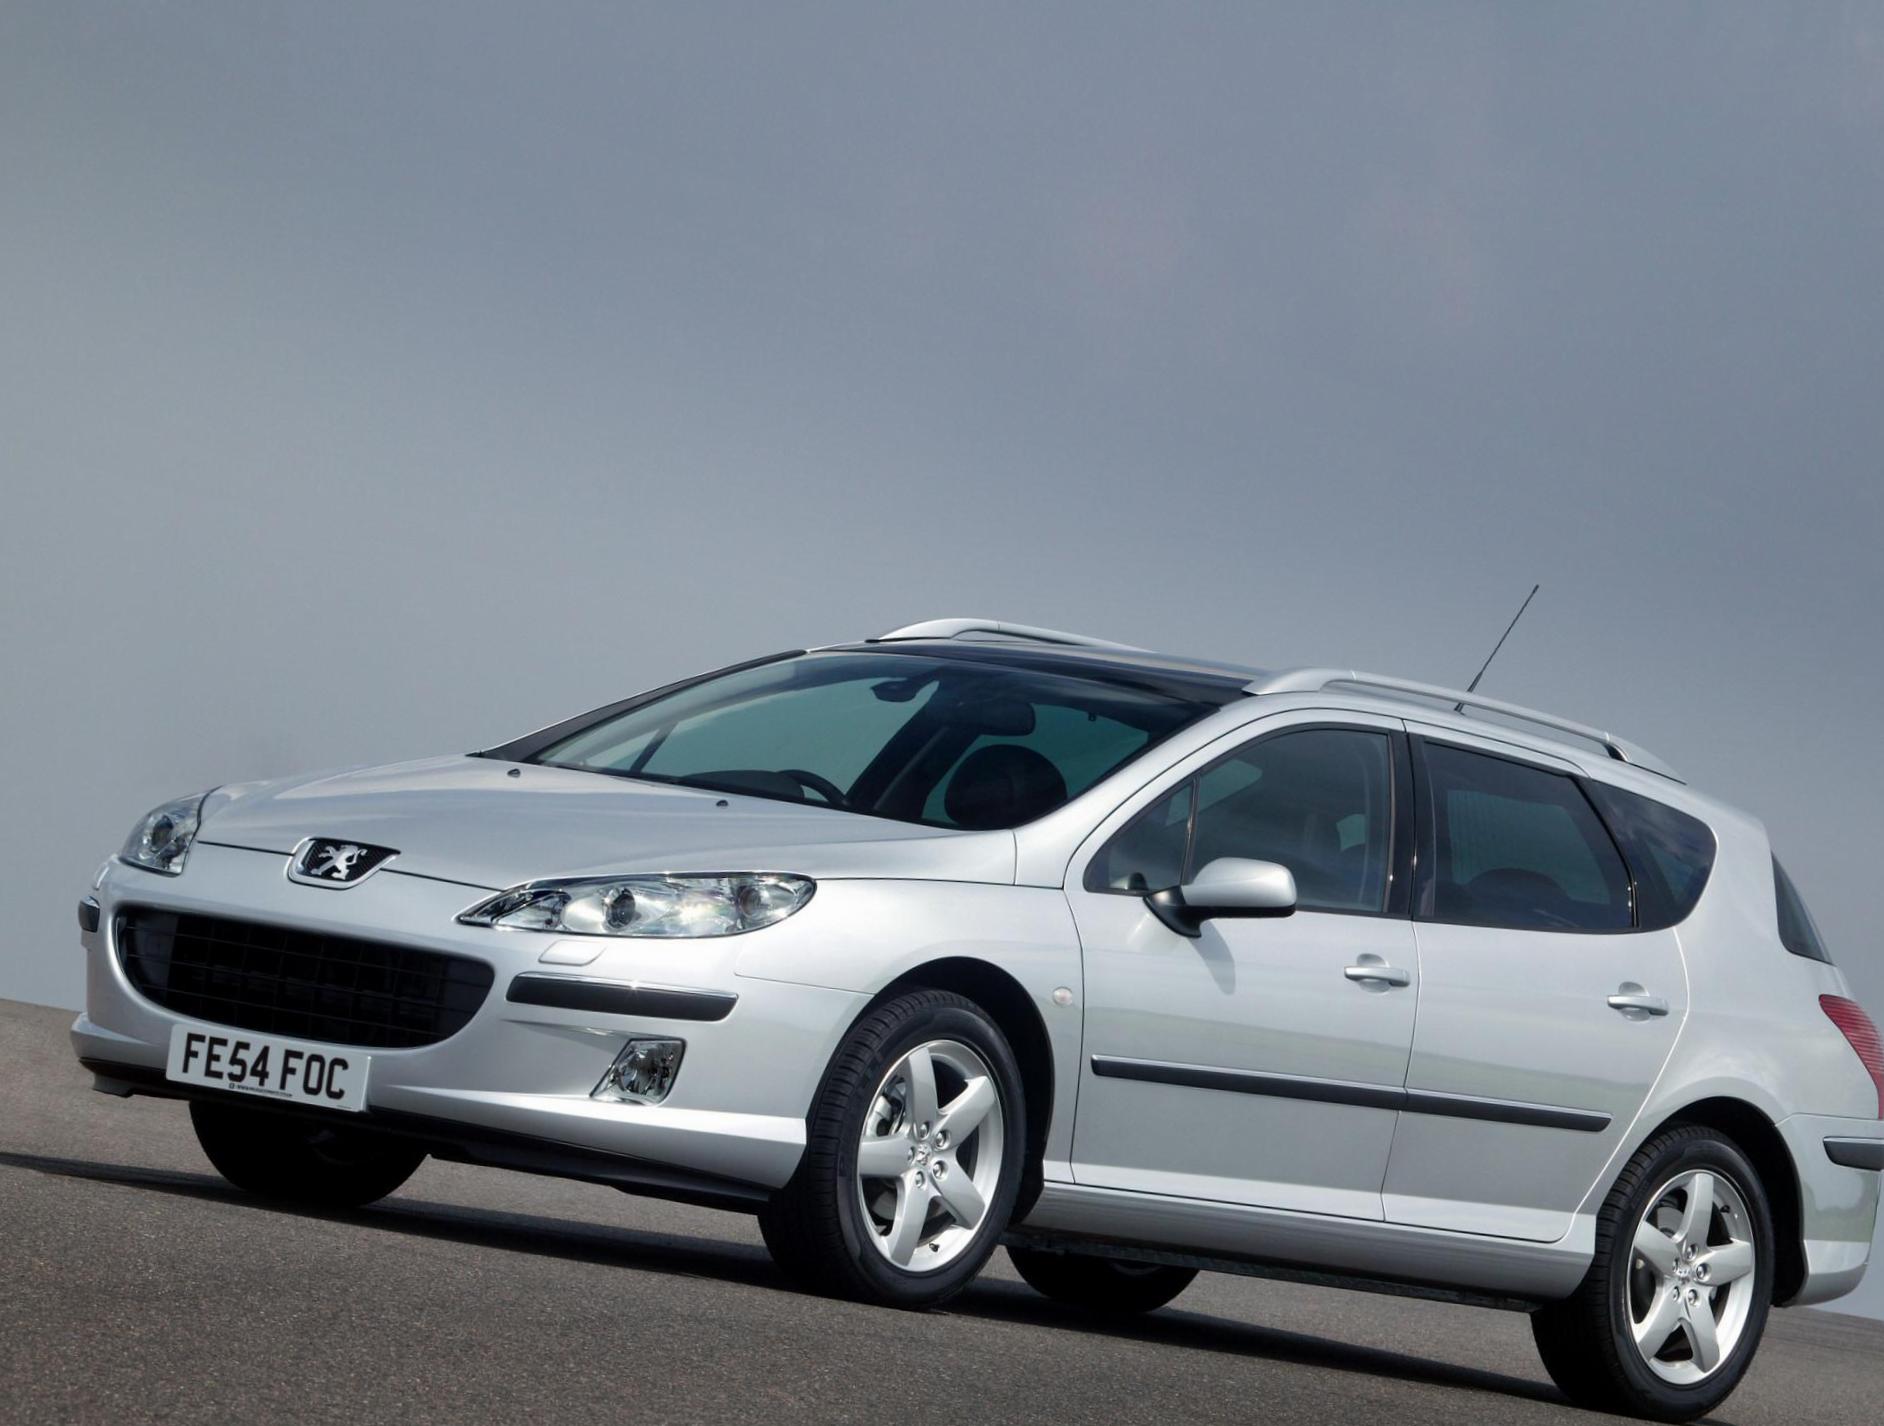 407 Peugeot Specifications 2011